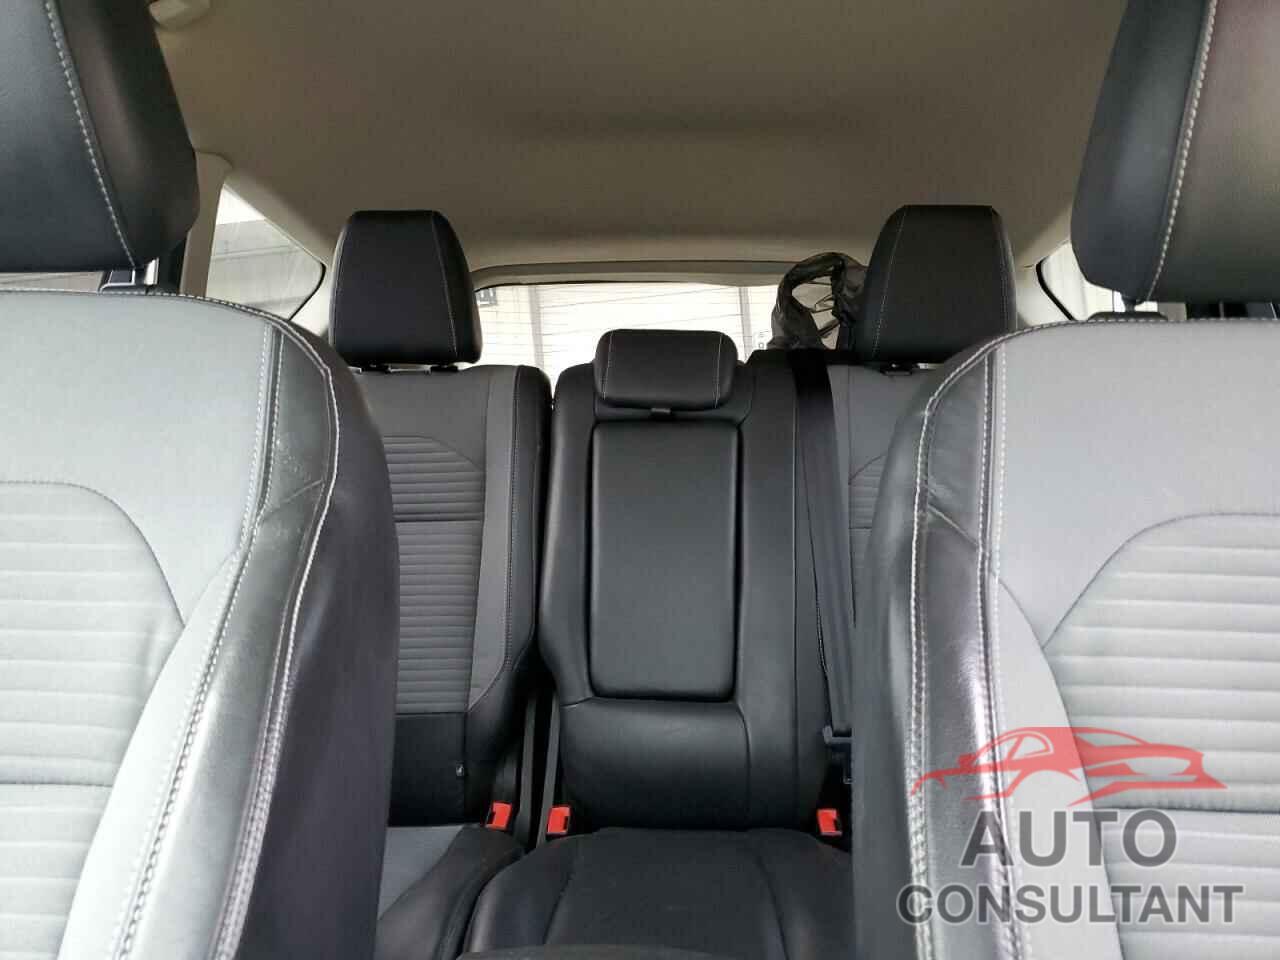 FORD ESCAPE 2018 - 1FMCU0GD2JUD27578